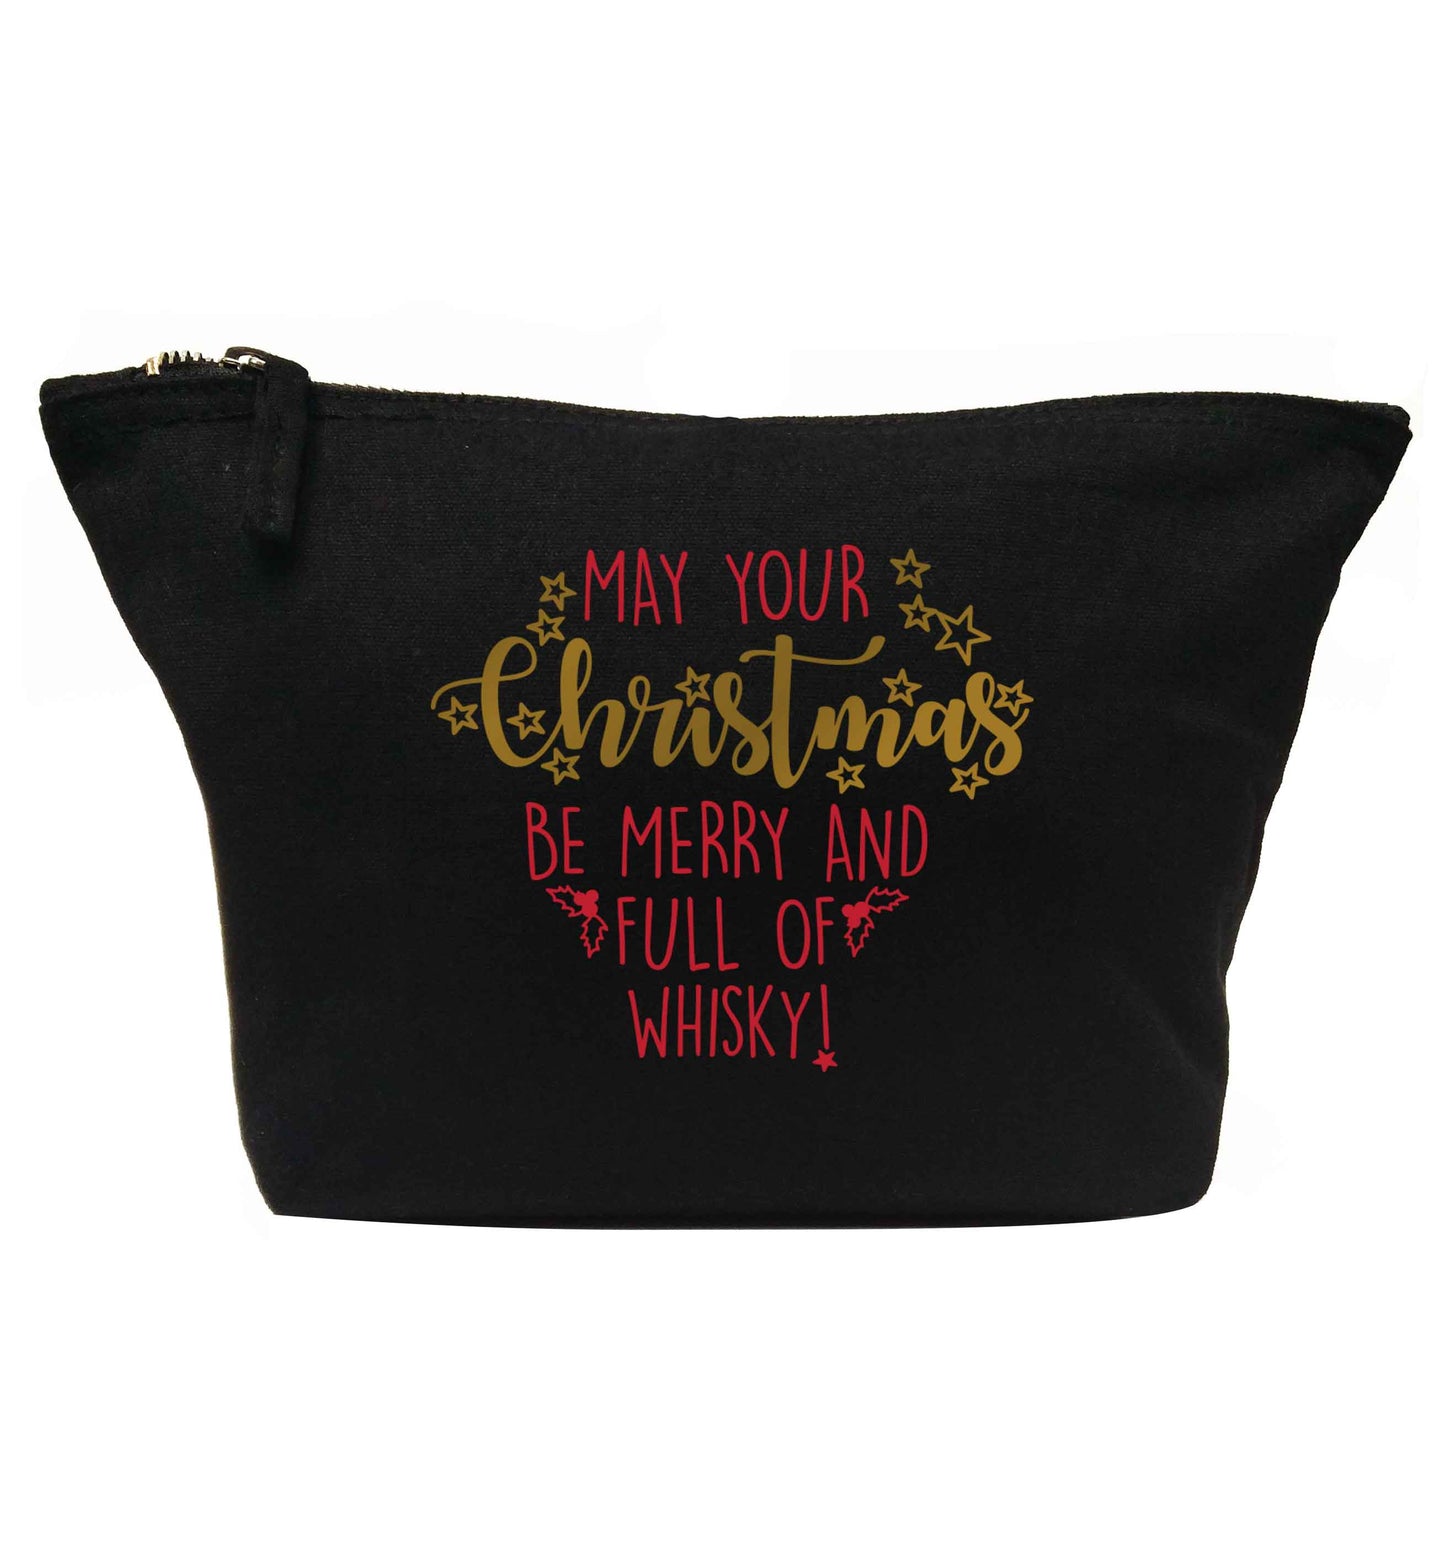 May your Christmas be merry and full of whisky | makeup / wash bag